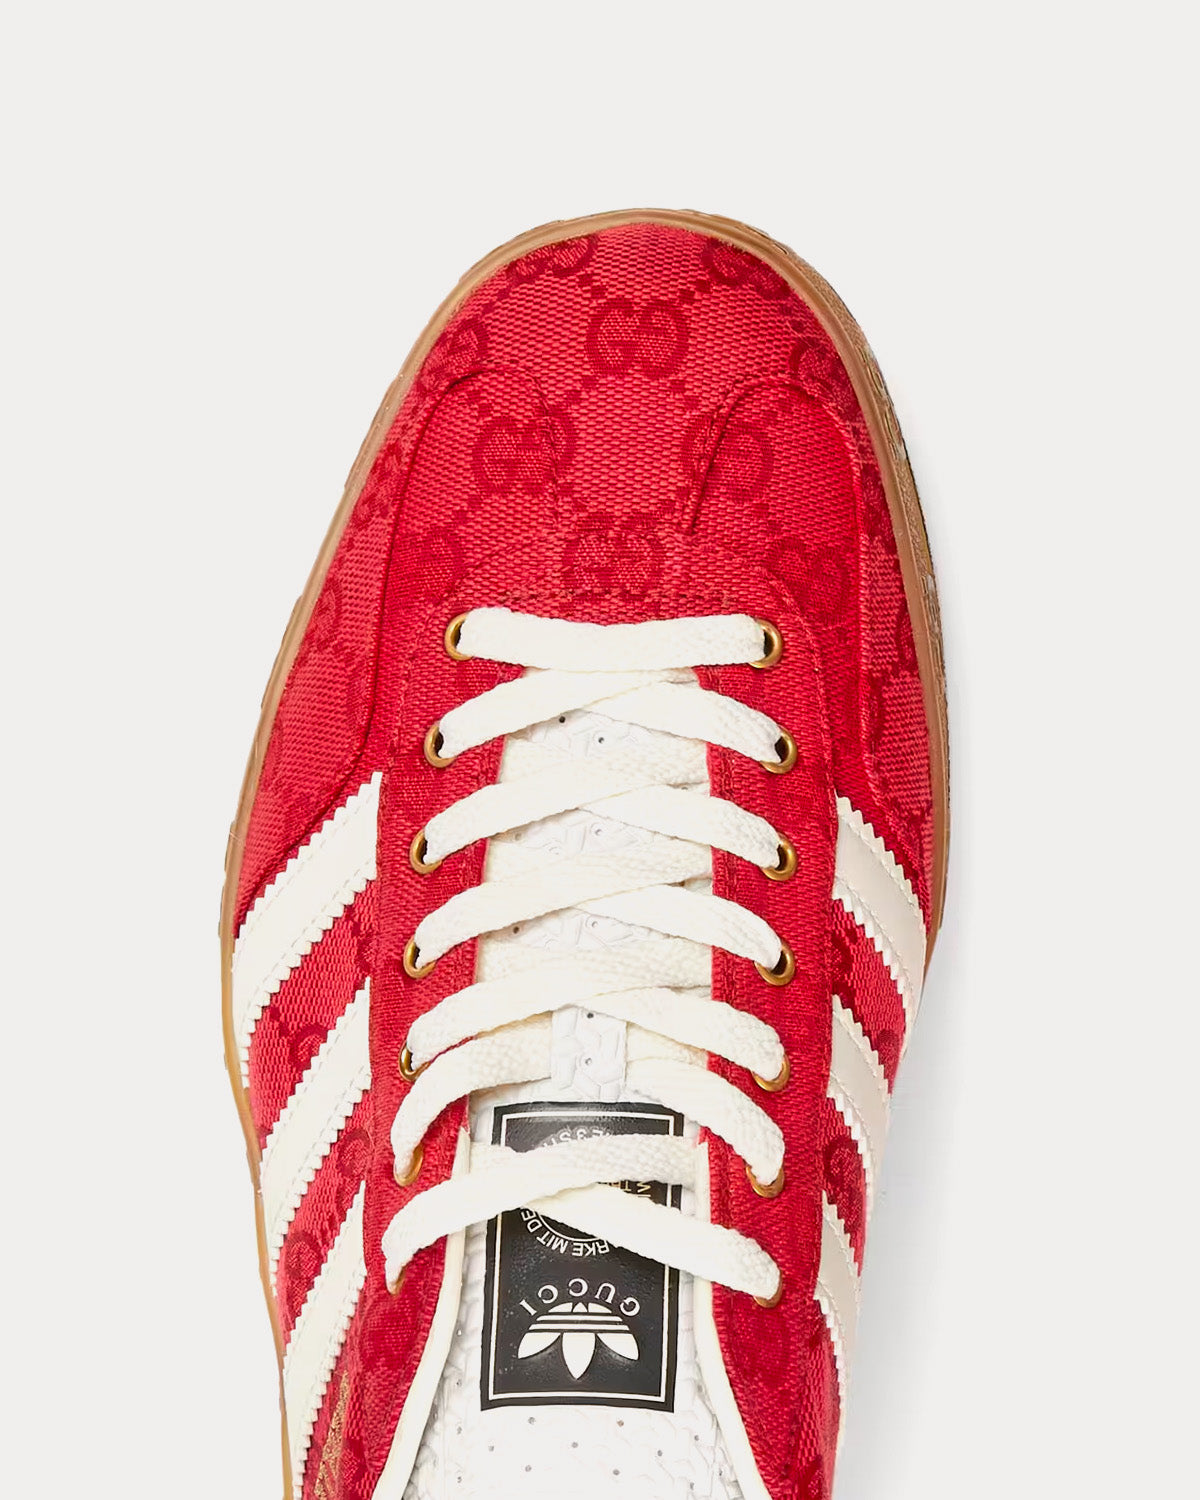 Adidas x Gucci - Gazelle Original GG Canvas red Low Top Sneakers